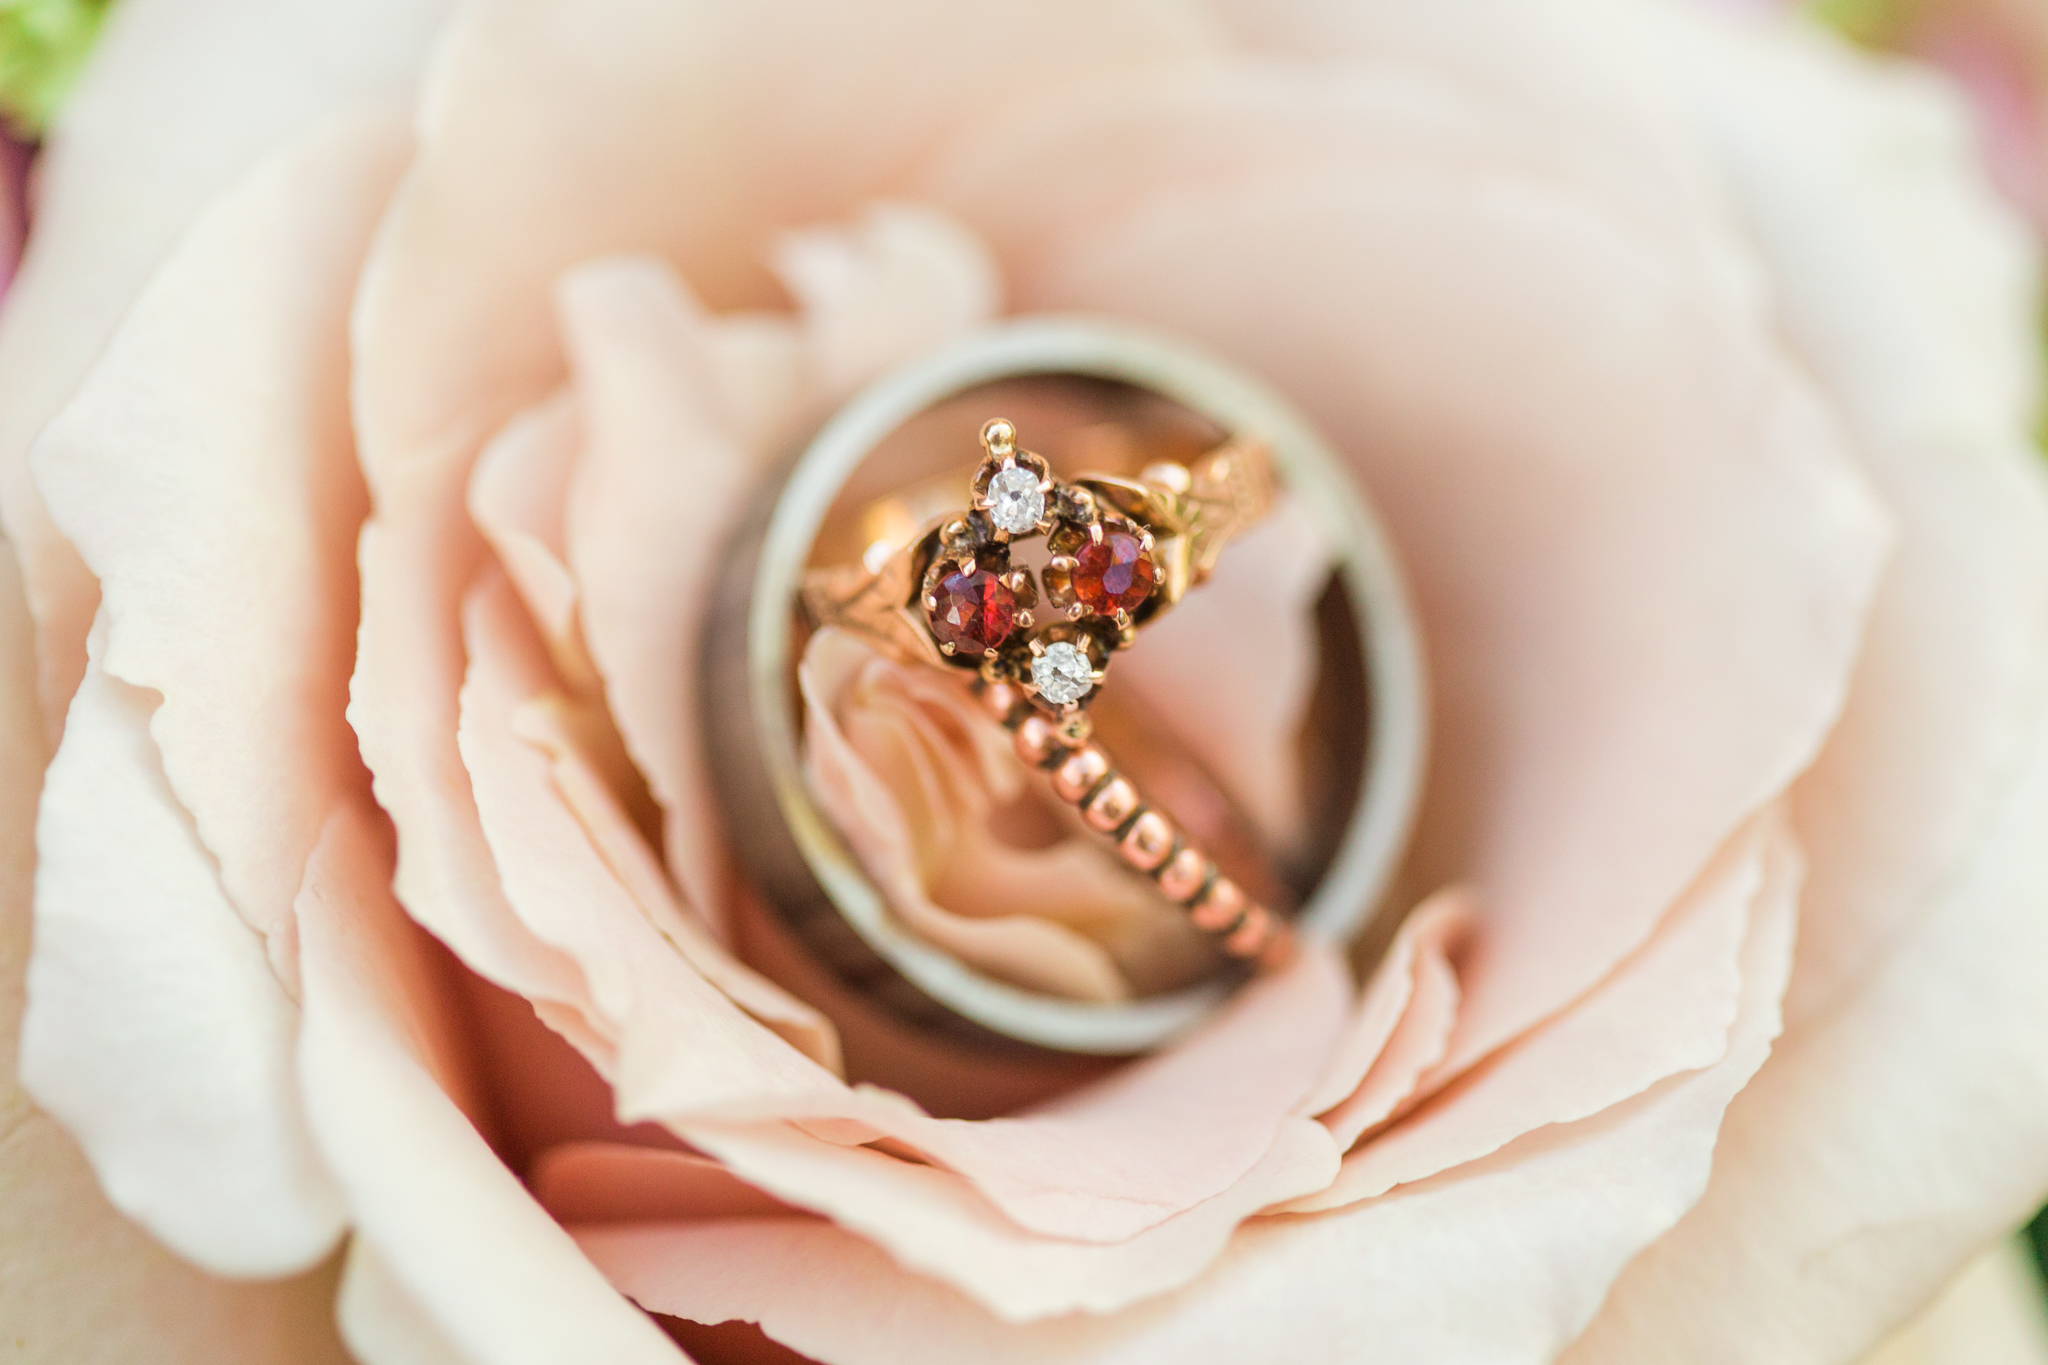 Vintage family heirloom wedding ring with ruby and diamonds - Pearl Weddings & Events